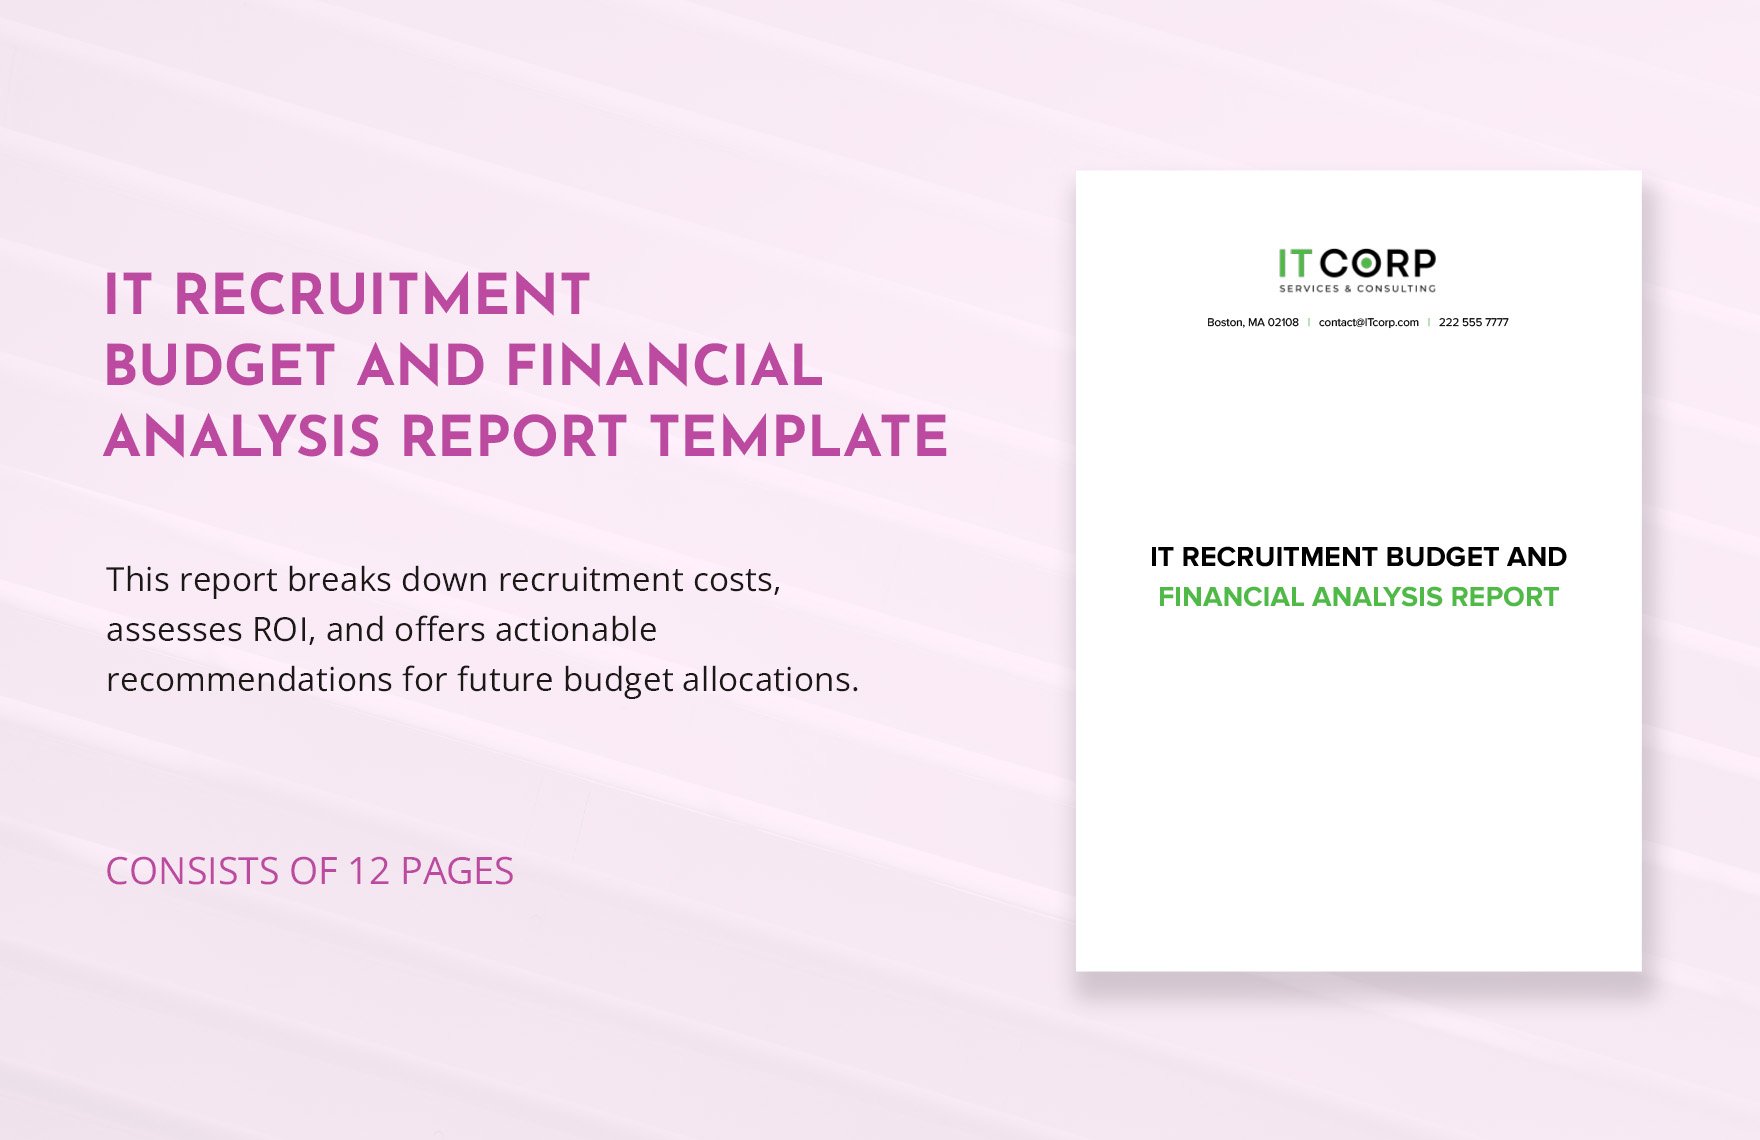 IT Recruitment Budget and Financial Analysis Report Template